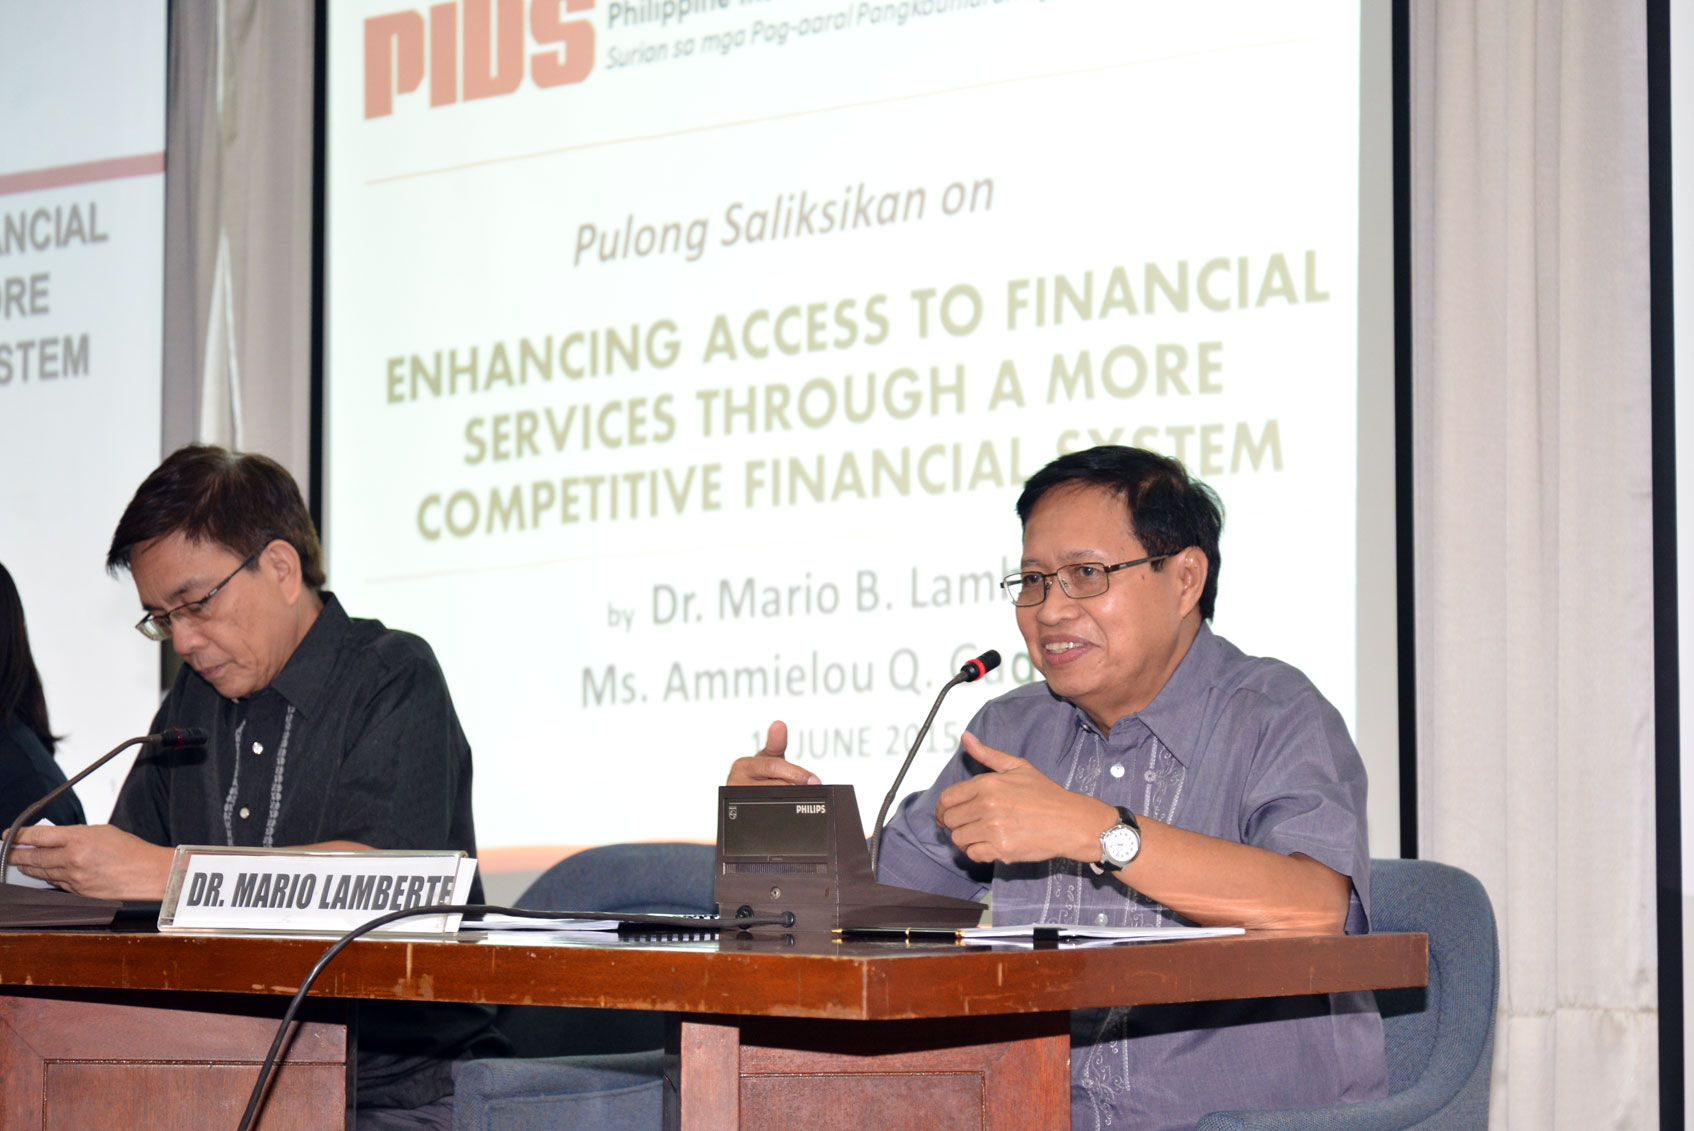 Pulong Saliksikan on Enhancing Access to Financial Services through a More Competitive Financial System-DSC_3542.jpg